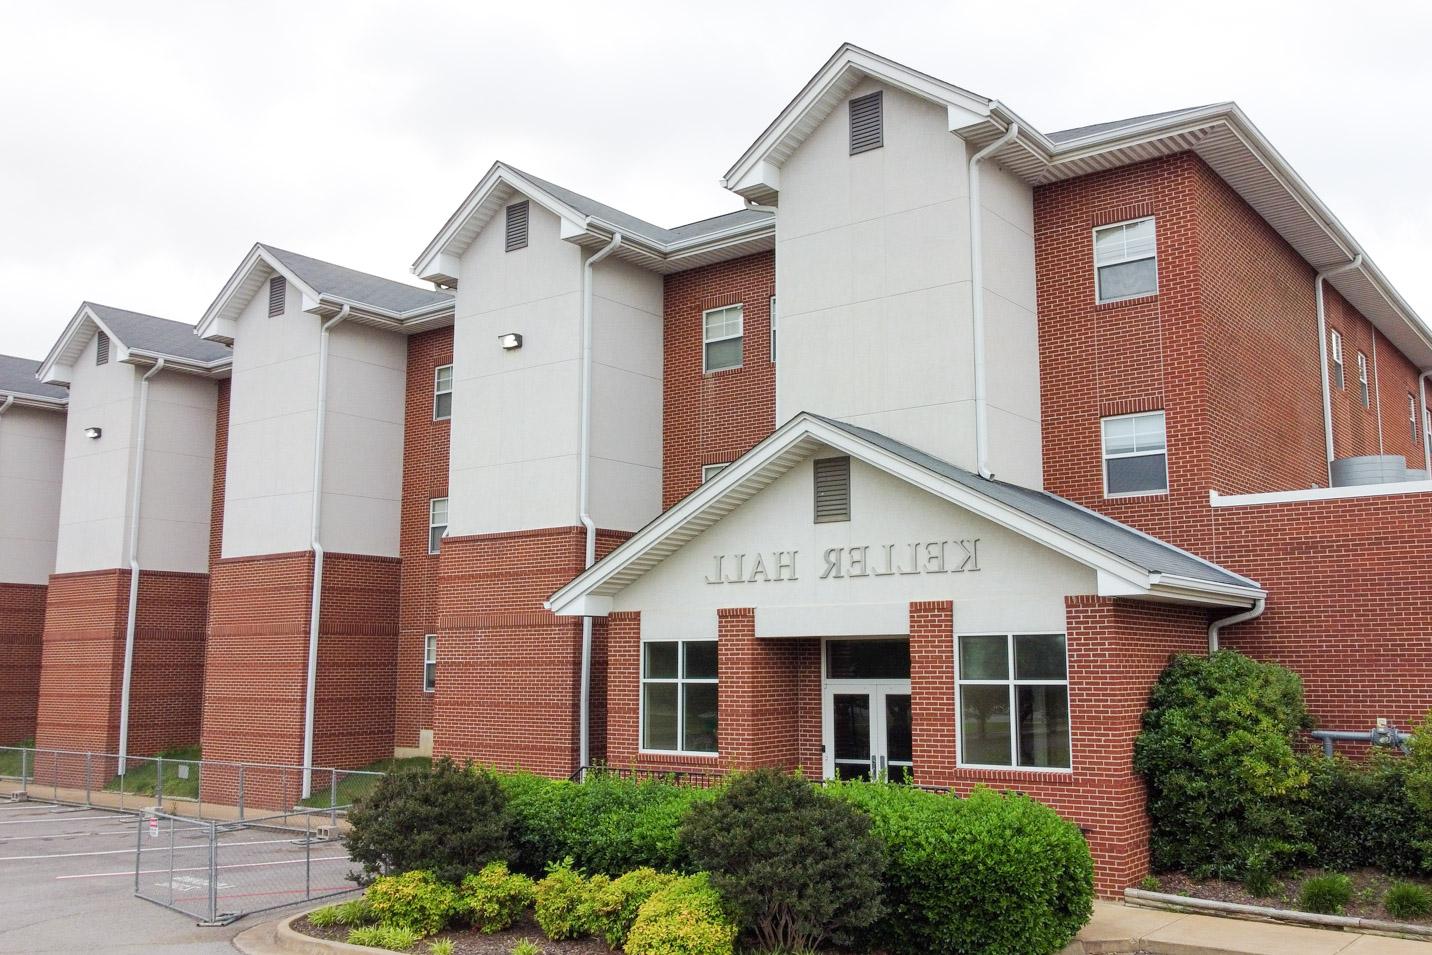 This is a photo of Keller Hall, a men's residence hall at Harding University.